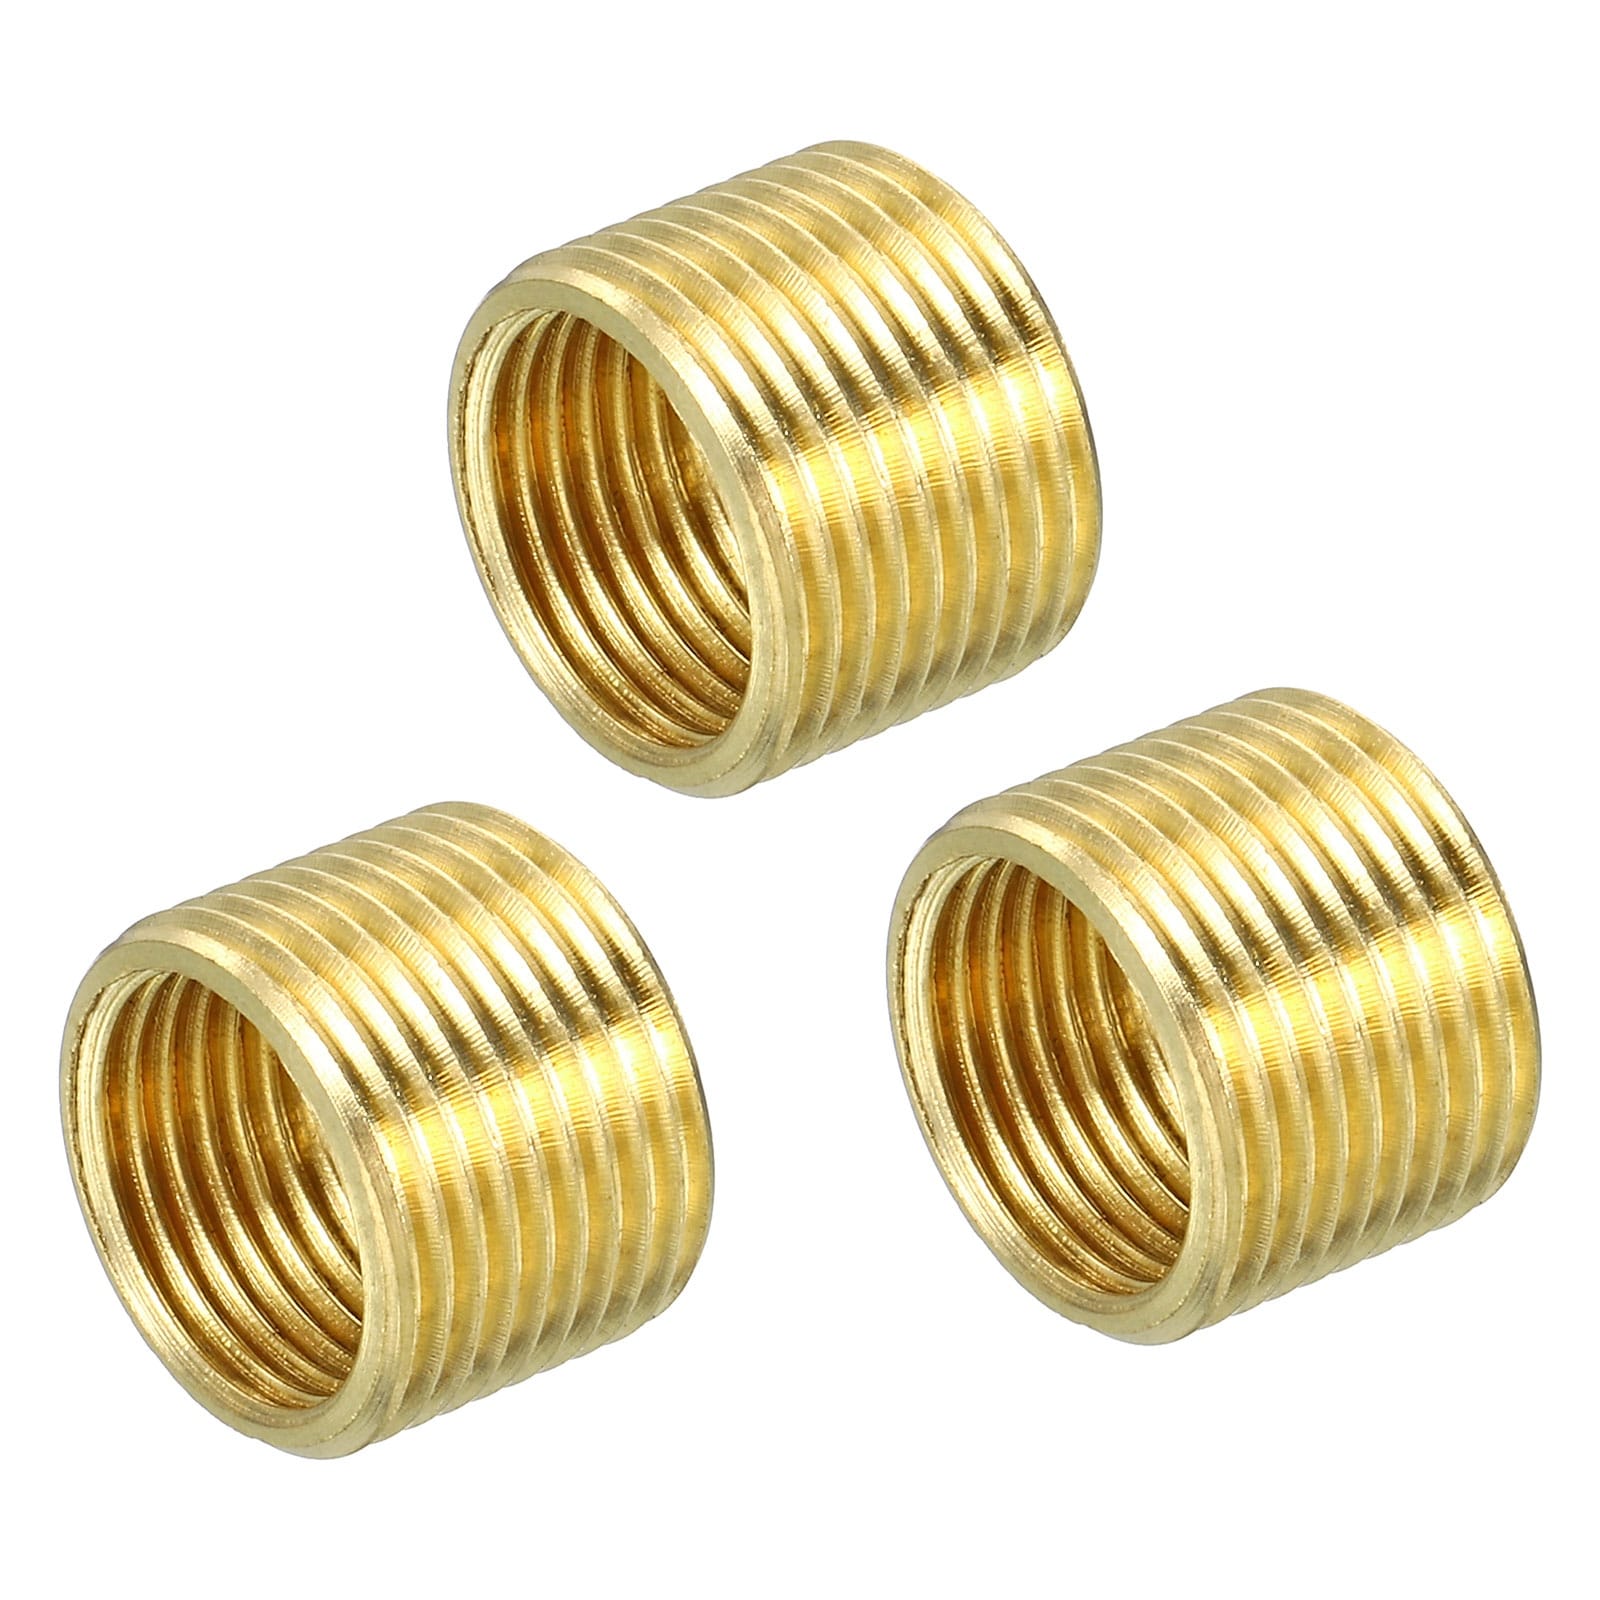 10pcs M10 to M6 15mm Double Male Threaded Reducer Bolt Screw Fitting  Adapter